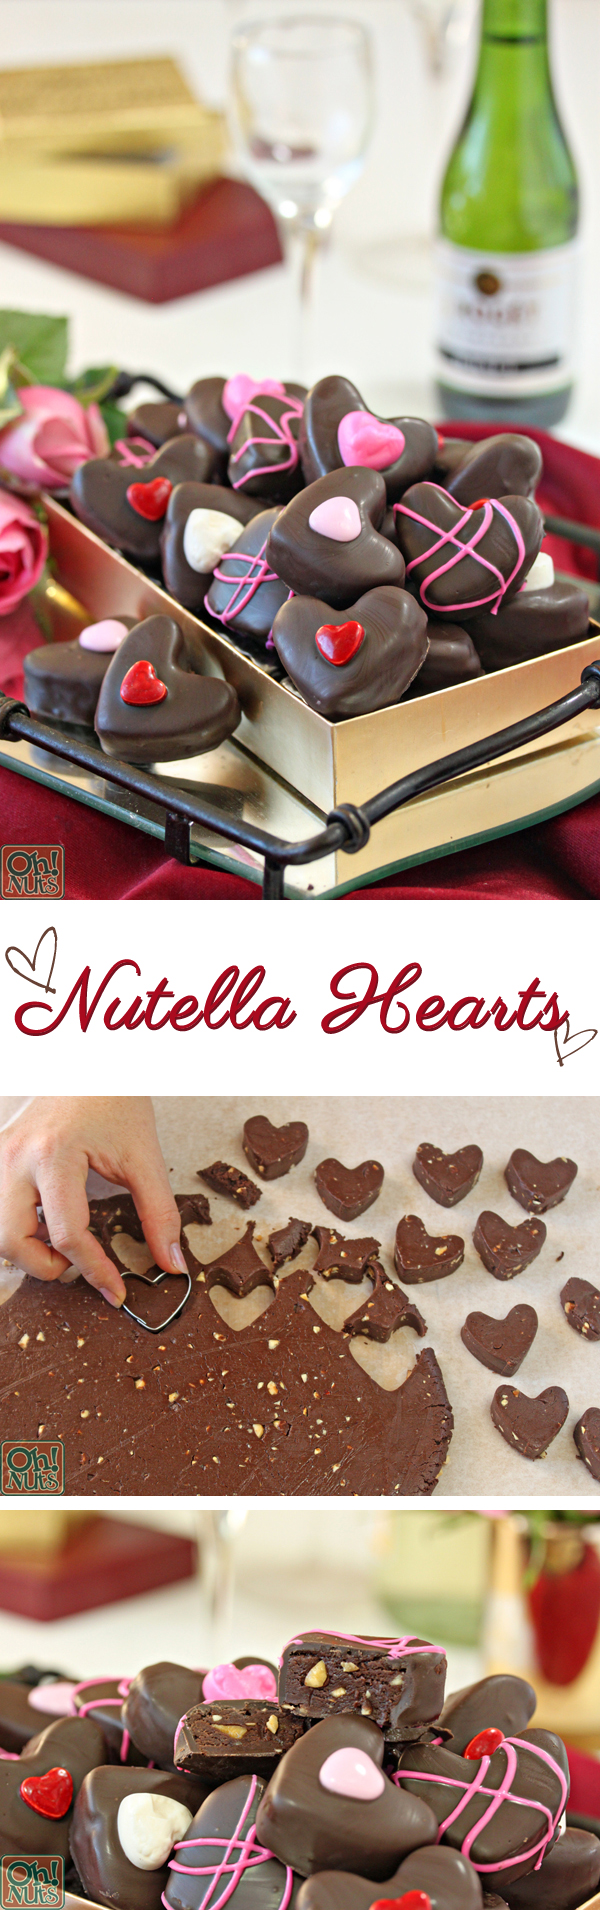 How to Make Nutella Candy Hearts for Valentine's Day | From OhNuts.com